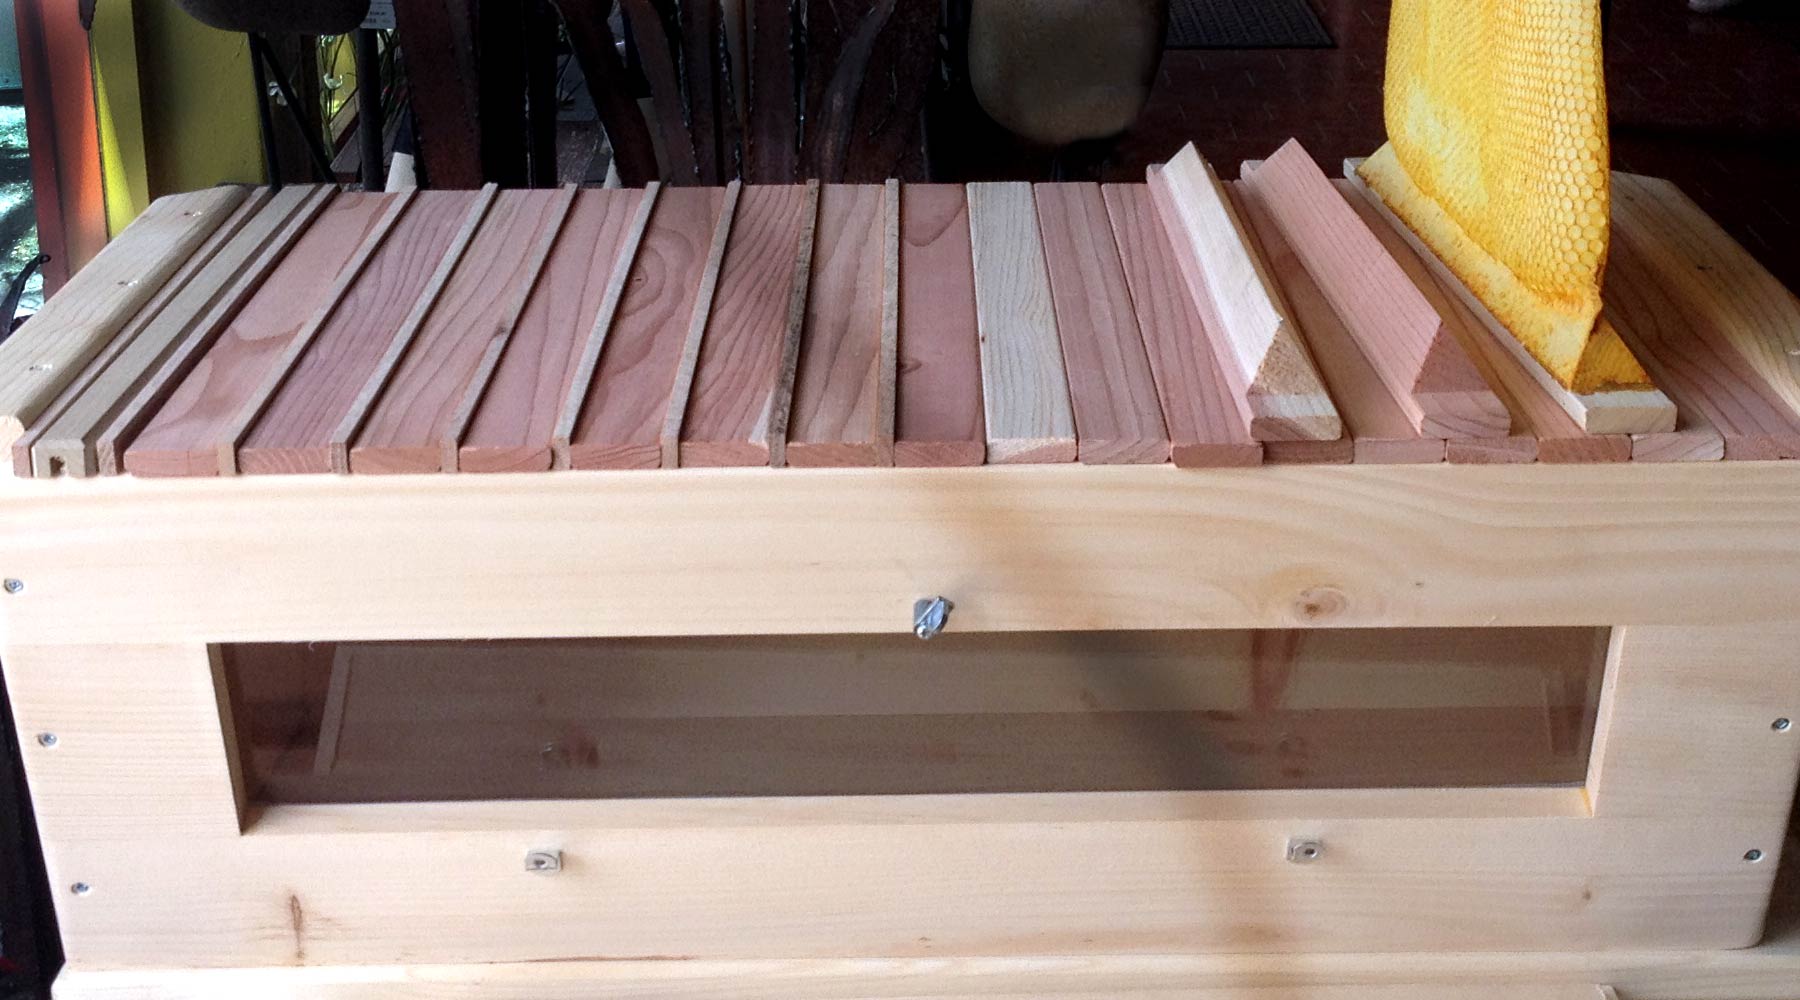 Using Spacers in the Top Bar Hive